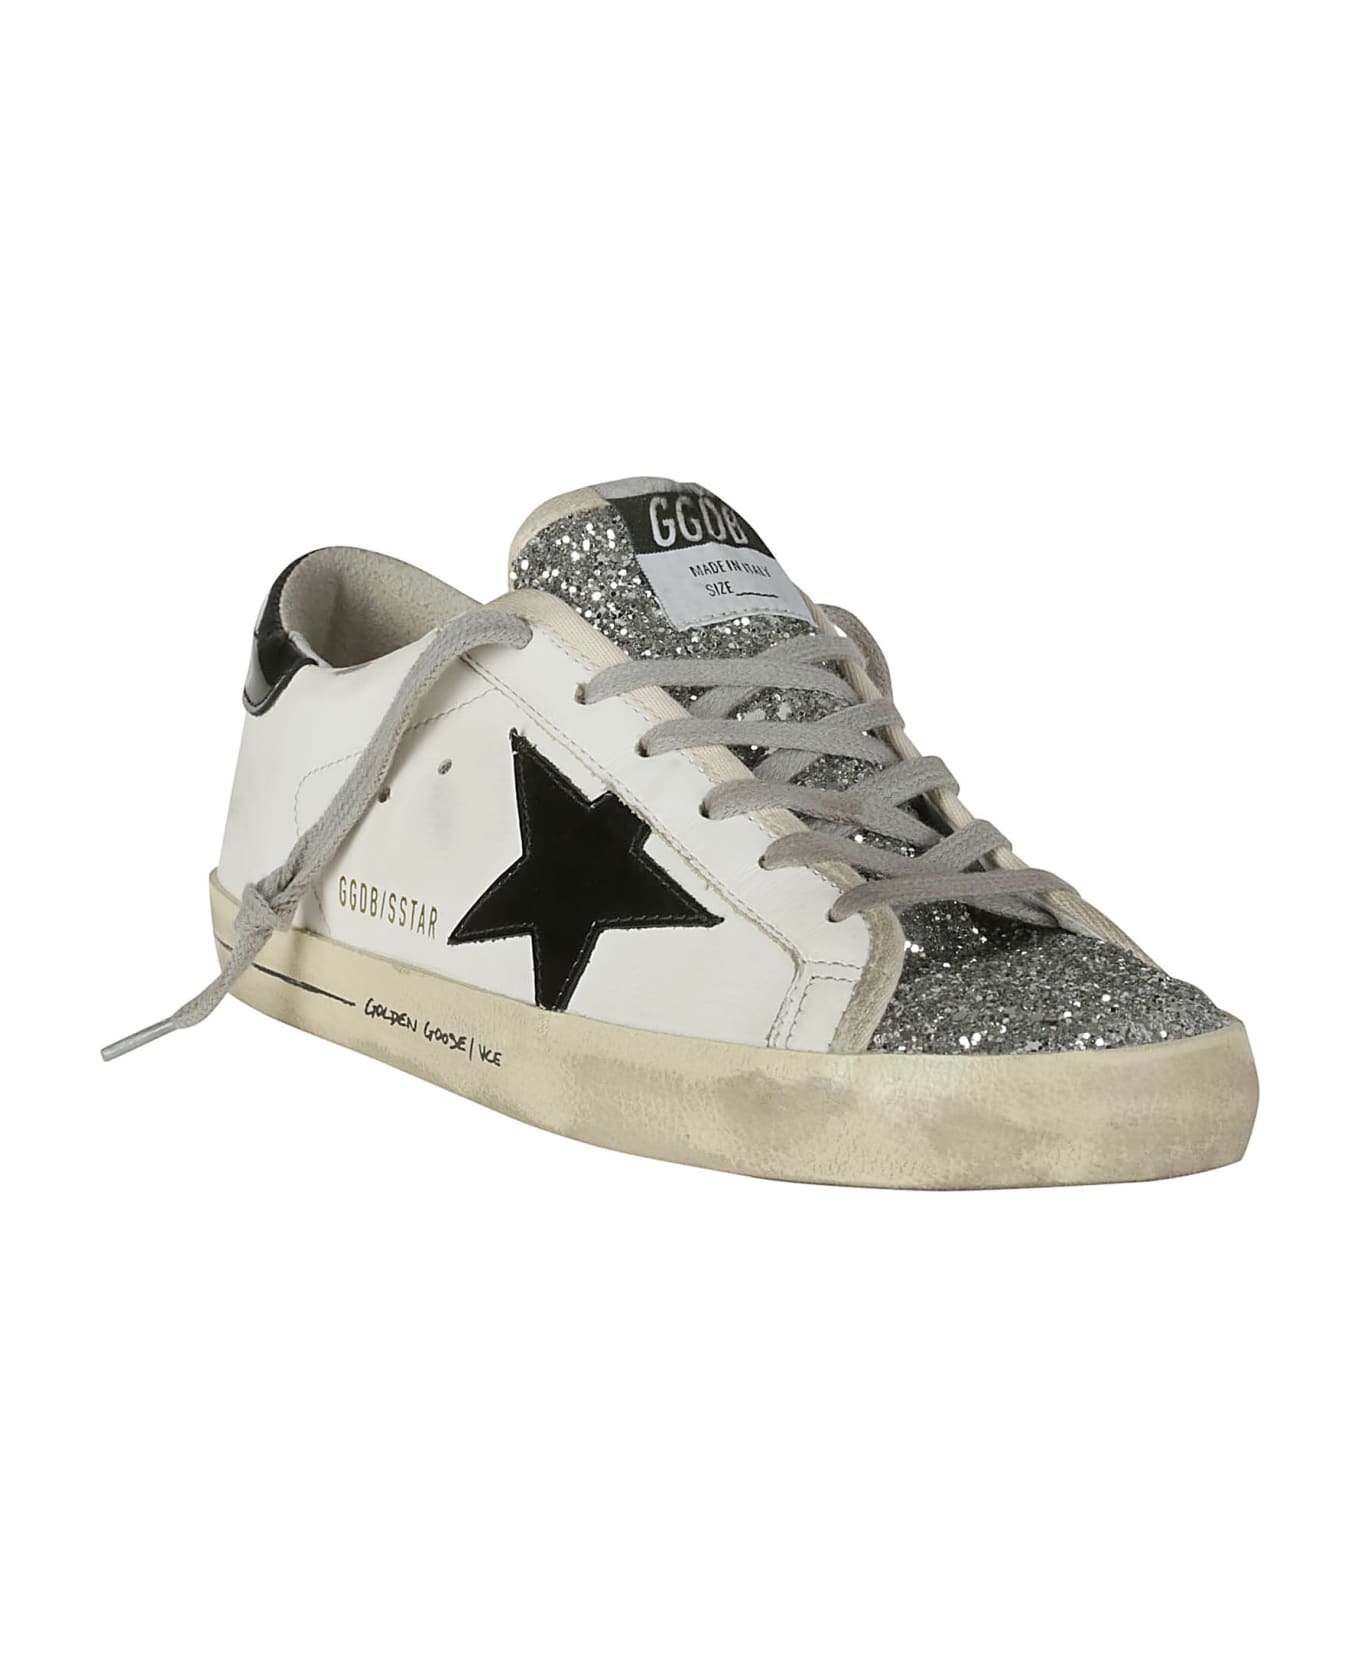 Golden Goose Superstar Classic Sneakers - WHITE/BLACK/SILVER ワンピース＆ドレス